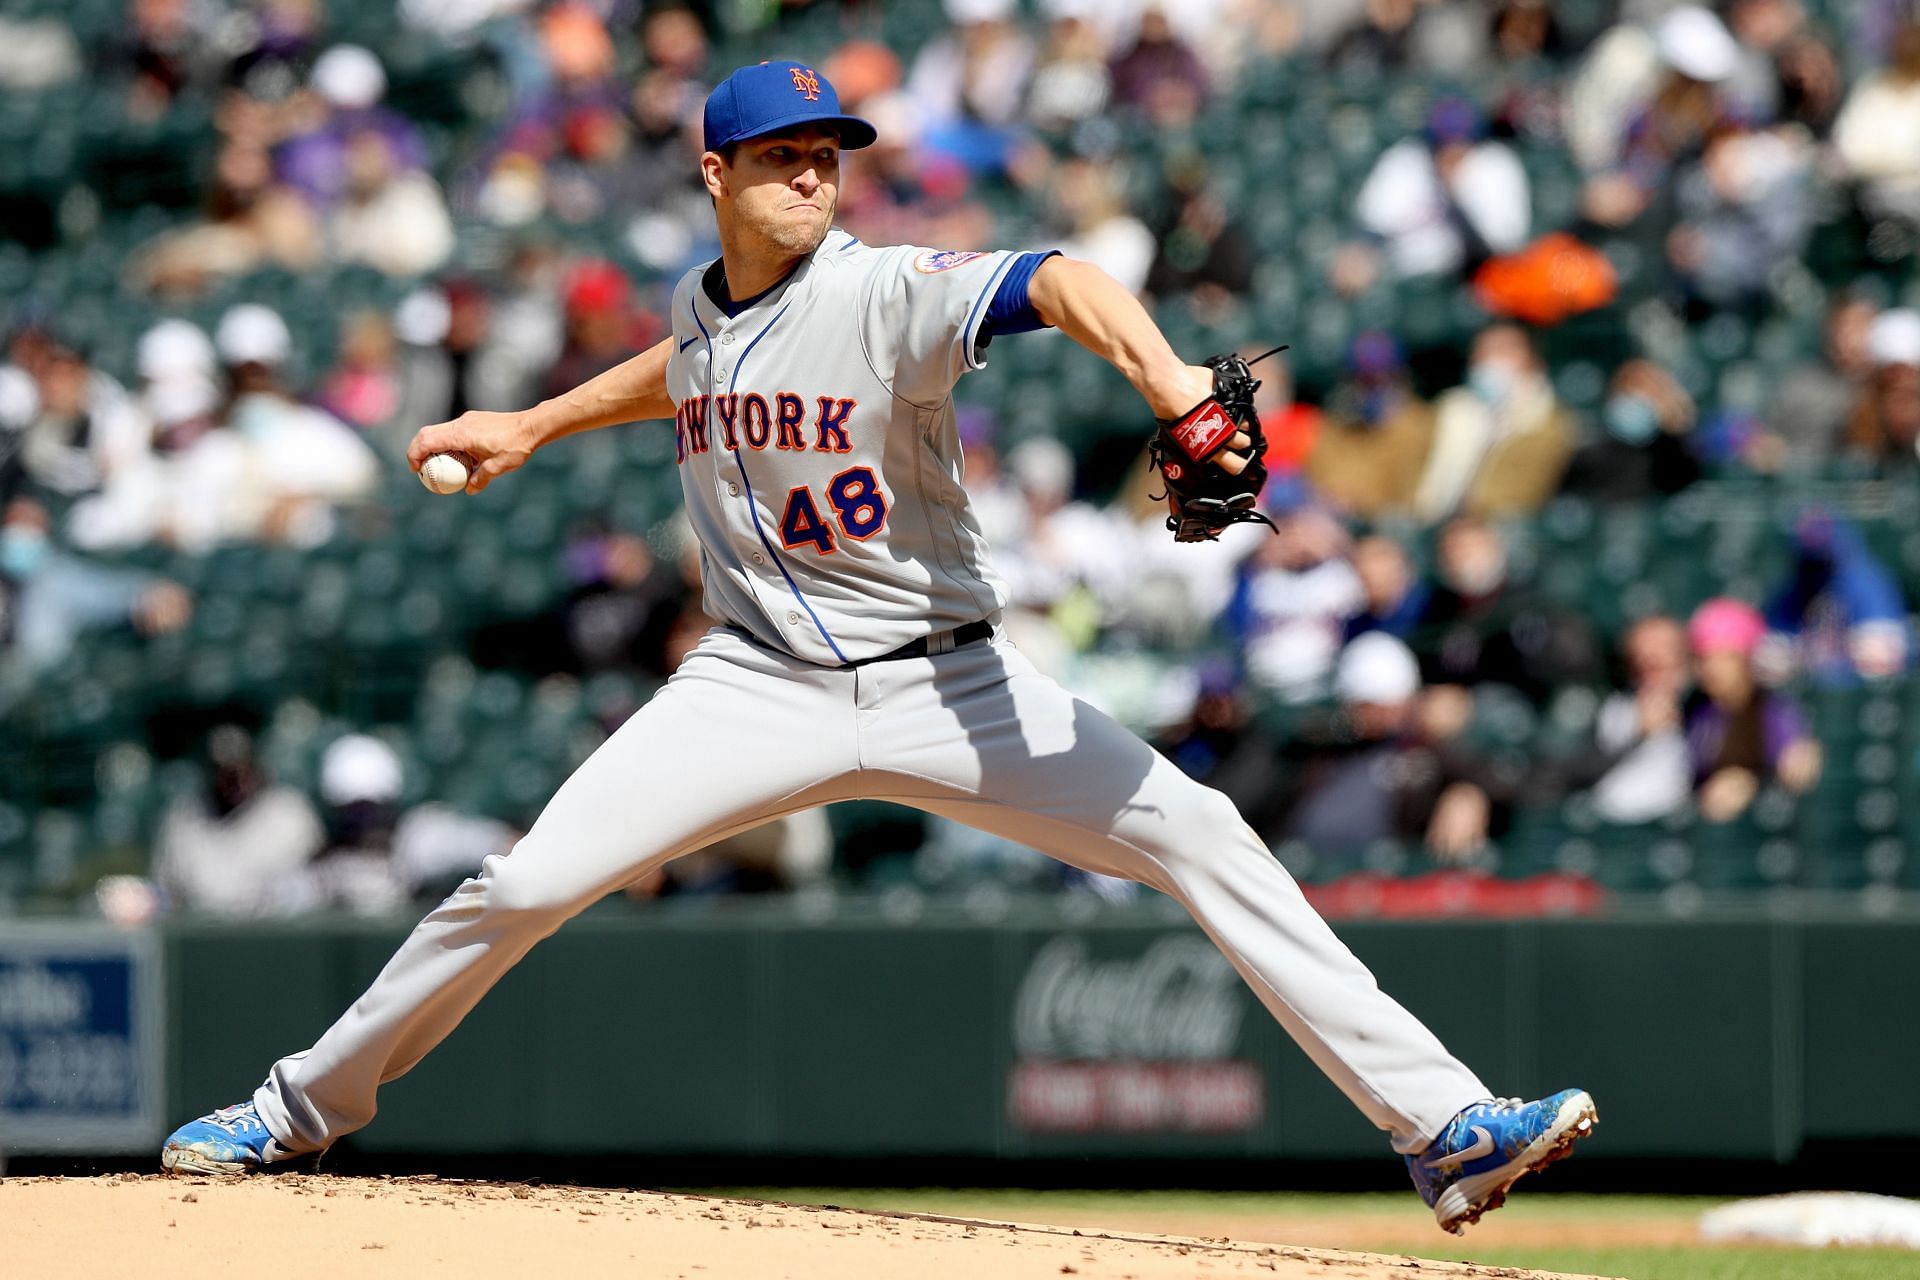 Starting pitcher Jacob deGrom of the New York Mets against the Colorado Rockies 